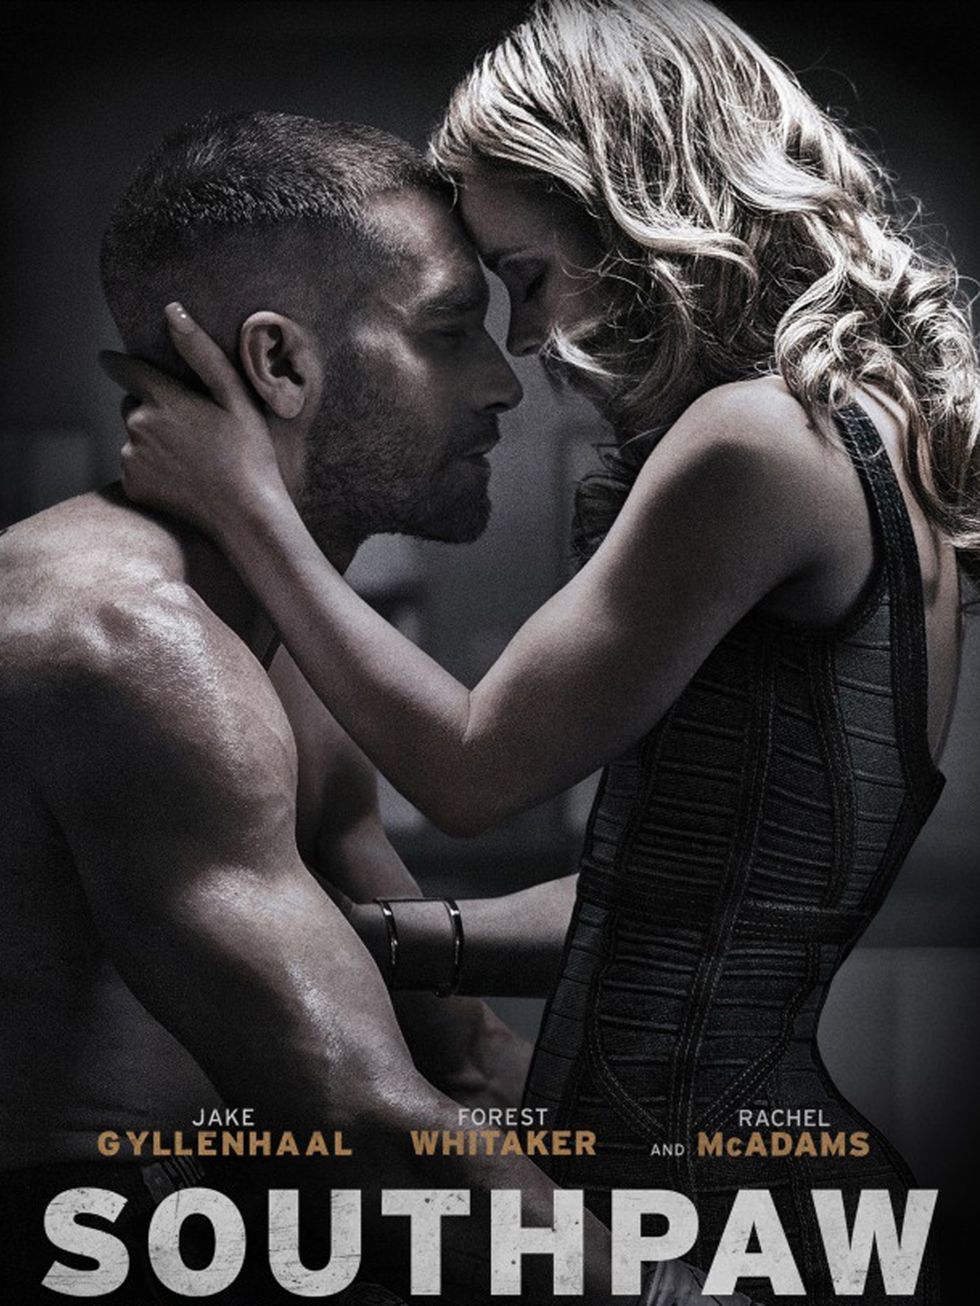 Romance, Interaction, Love, Poster, Muscle, Flash photography, Photography, Photo caption, Kiss, Movie, 